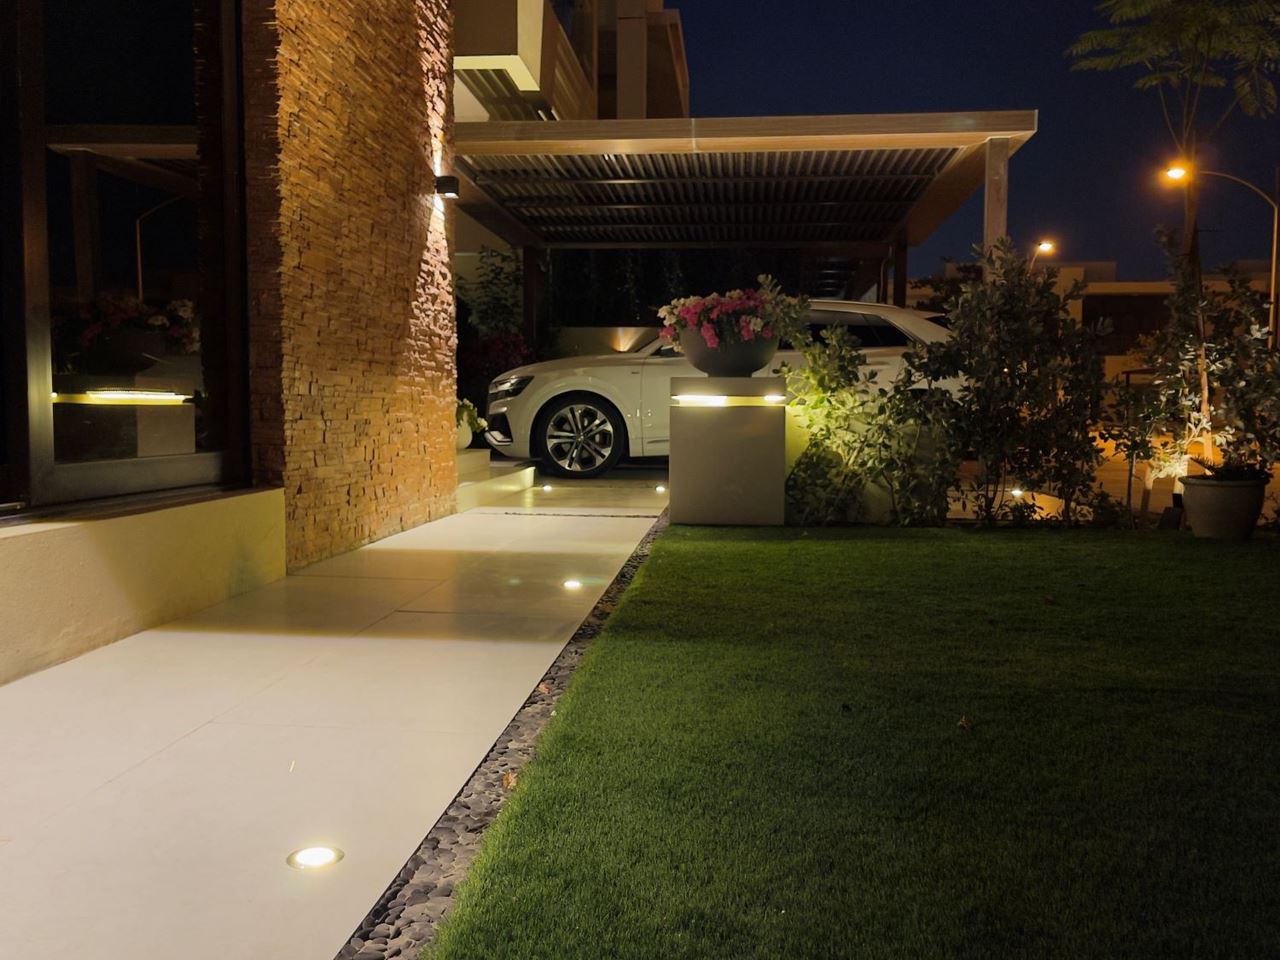 Green Gardenia Landscaping LLC are Turning Spaces into an Oasis of Serenity in Dubai